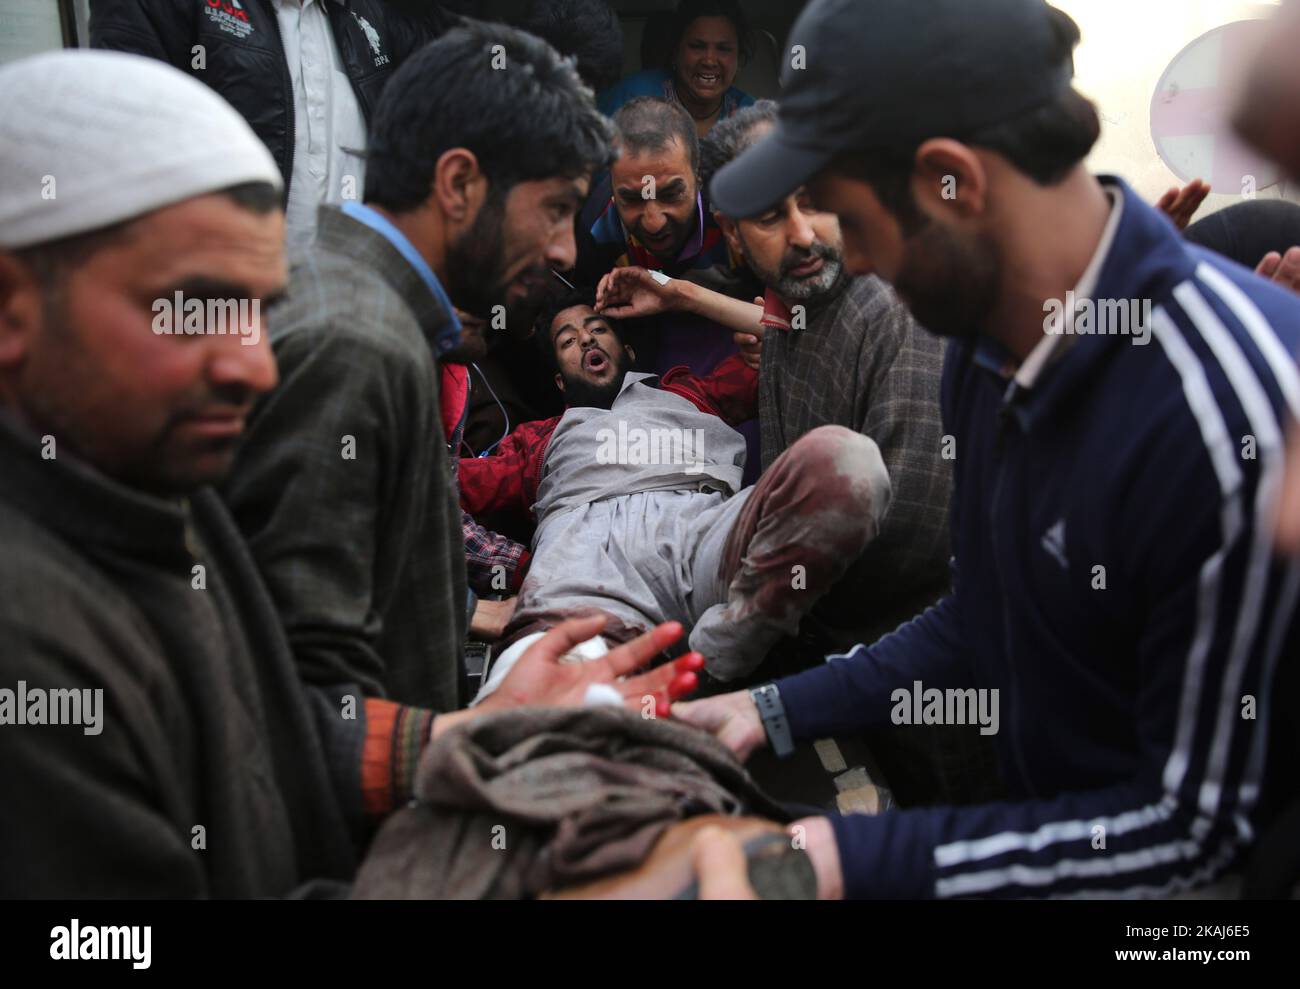 Kashmiri people take a wounded person to a local hospital in Srinagar, summer capital of Indian-controlled Kashmir, April 15, 2016. A teenager was killed and several others wounded Friday after army troops fired on civilians during protests in Indian-controlled Kashmir, officials said. (Xinhua/Javed Dar) ****Authorized by ytfs****  (Photo by Xinhua) Stock Photo